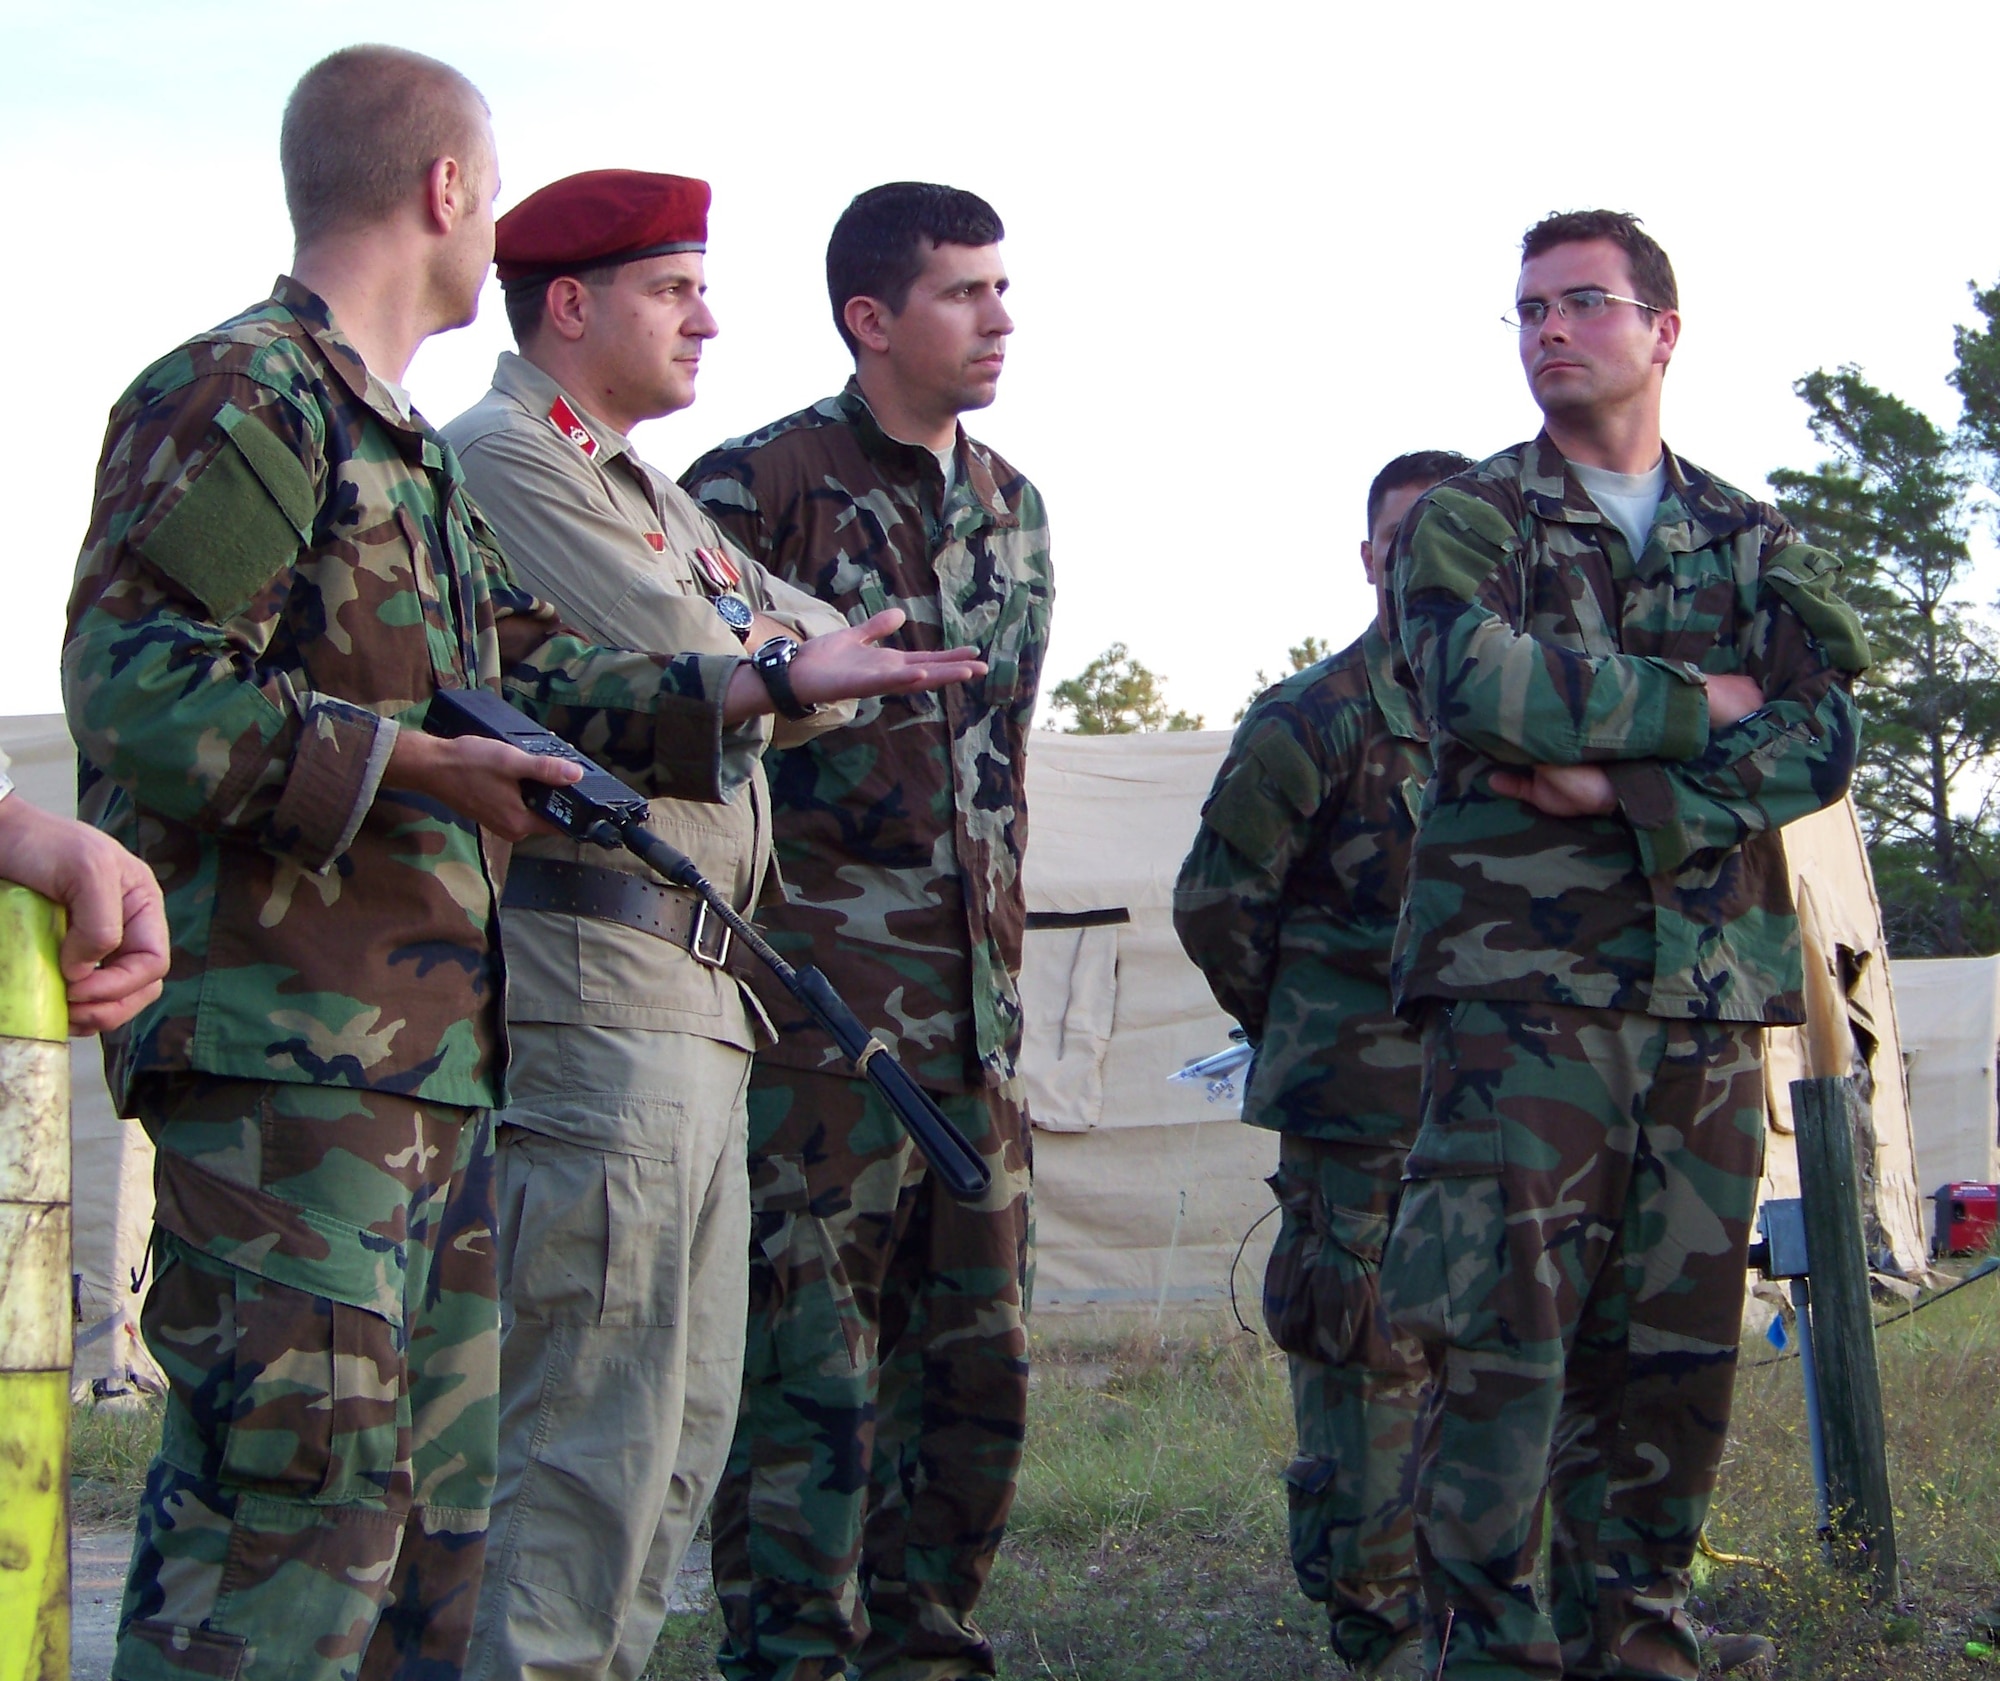 Staff Sgt. Sean Tanner (left), a combat aviation advisor with the 19th Special Operations Squadron, explains the joint personnel recovery rehearsal being conducted by a joint combat aviation advisor and indigenous force recovery team to the partner nation’s high commander during the Raven Claw field exercise at the Eglin range Nov. 3. Fellow advisors Maj. David Bruton (center) and Capt. Brian Daniels (right) also led the partner nation commanders on a tour of the encampment. (Air Force photo by Airman 1st Class Joe McFadden.)